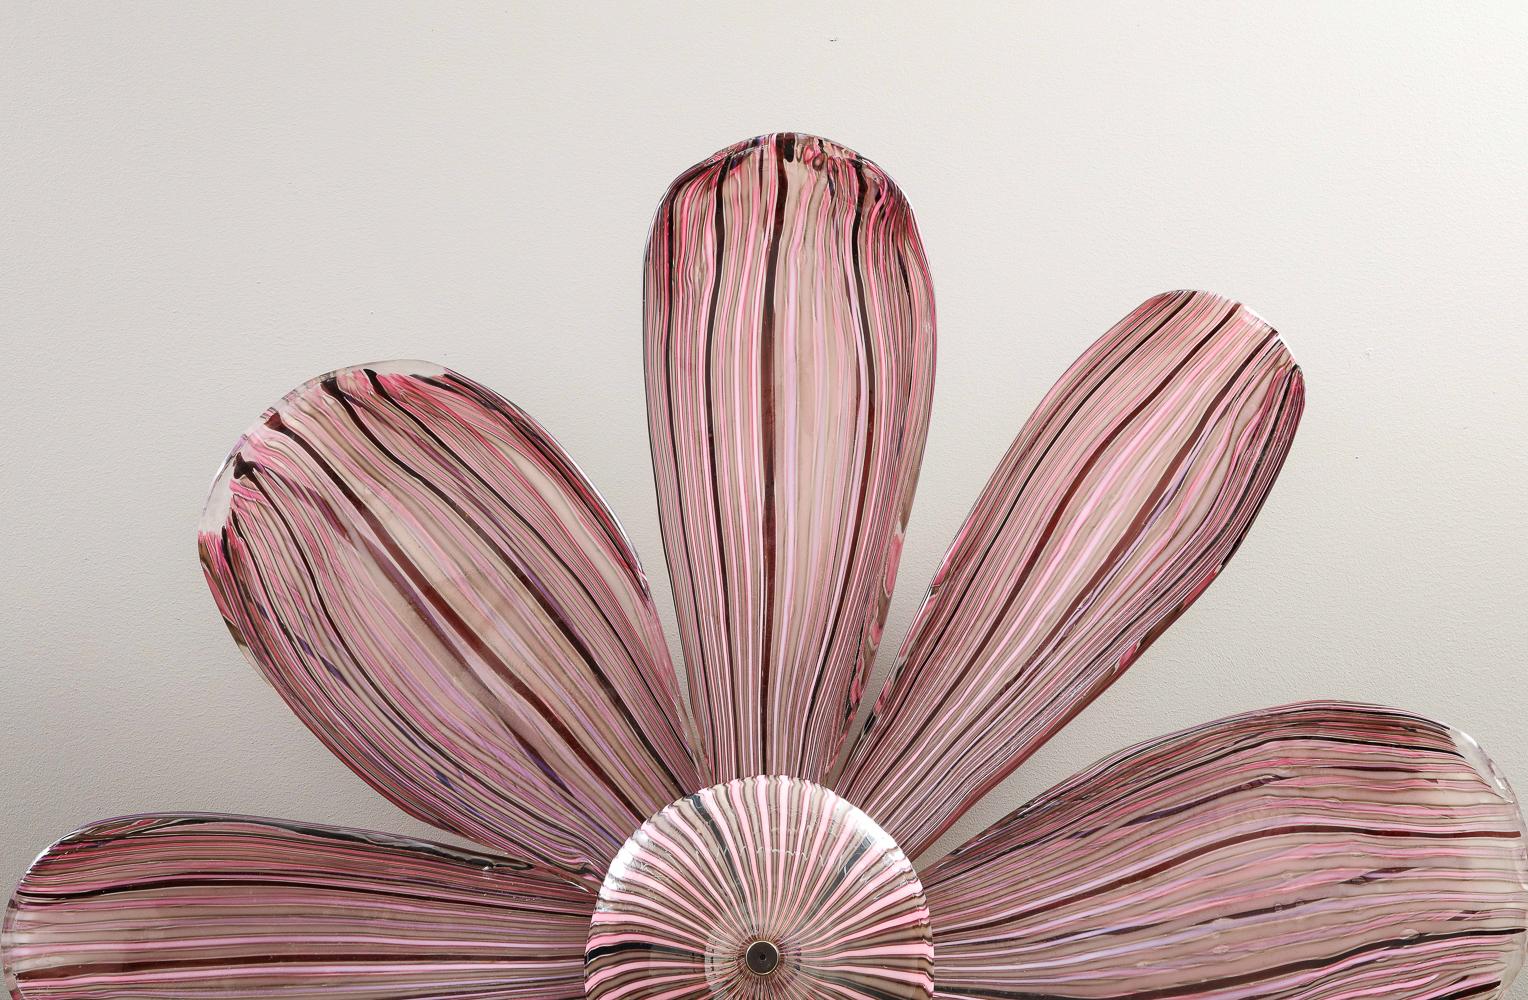 Margherita Illuminated Wall Sculpture by Cenedese.  Blown glass, steel. Massive sculpture of a daisy, custom made by Cenedese, Murano. Freehand glass elements with caned stripes in shades of maroon & pink. Concealed steel structure for mounting and